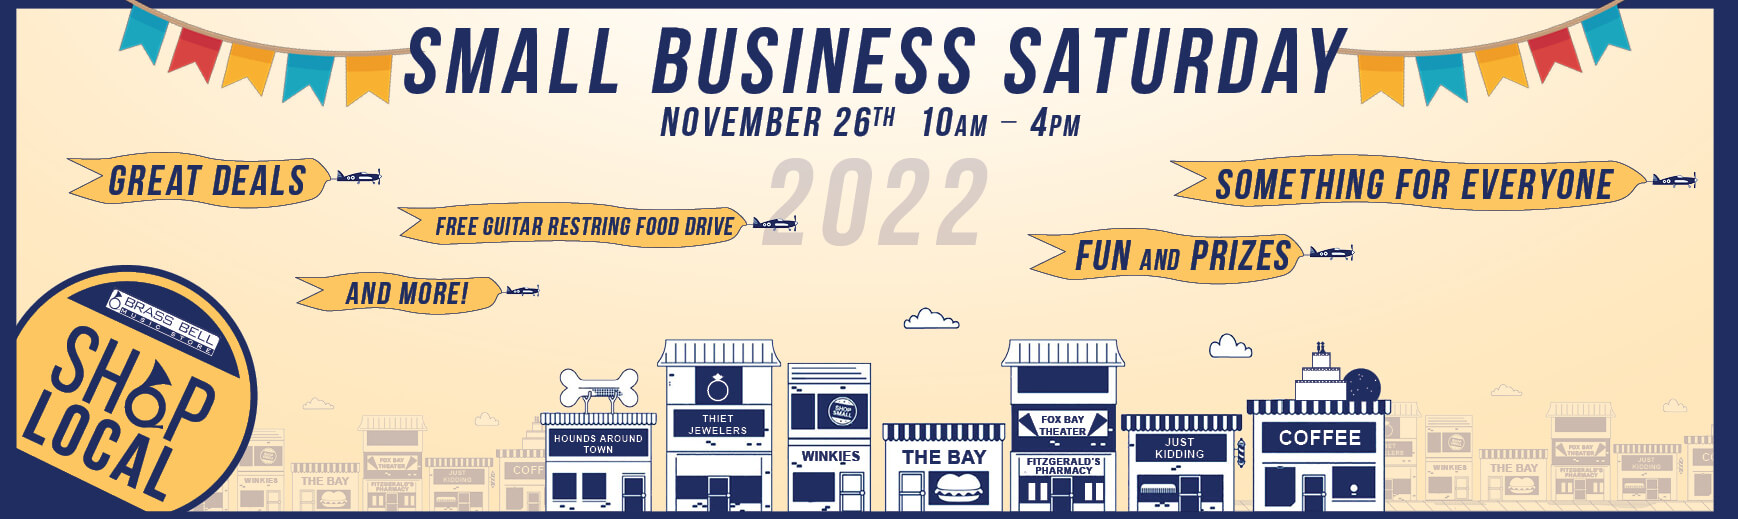 Small Business Saturday November 26th, 2022 10am-4pm, great deals, free guitar restring food drive, fun and prizes